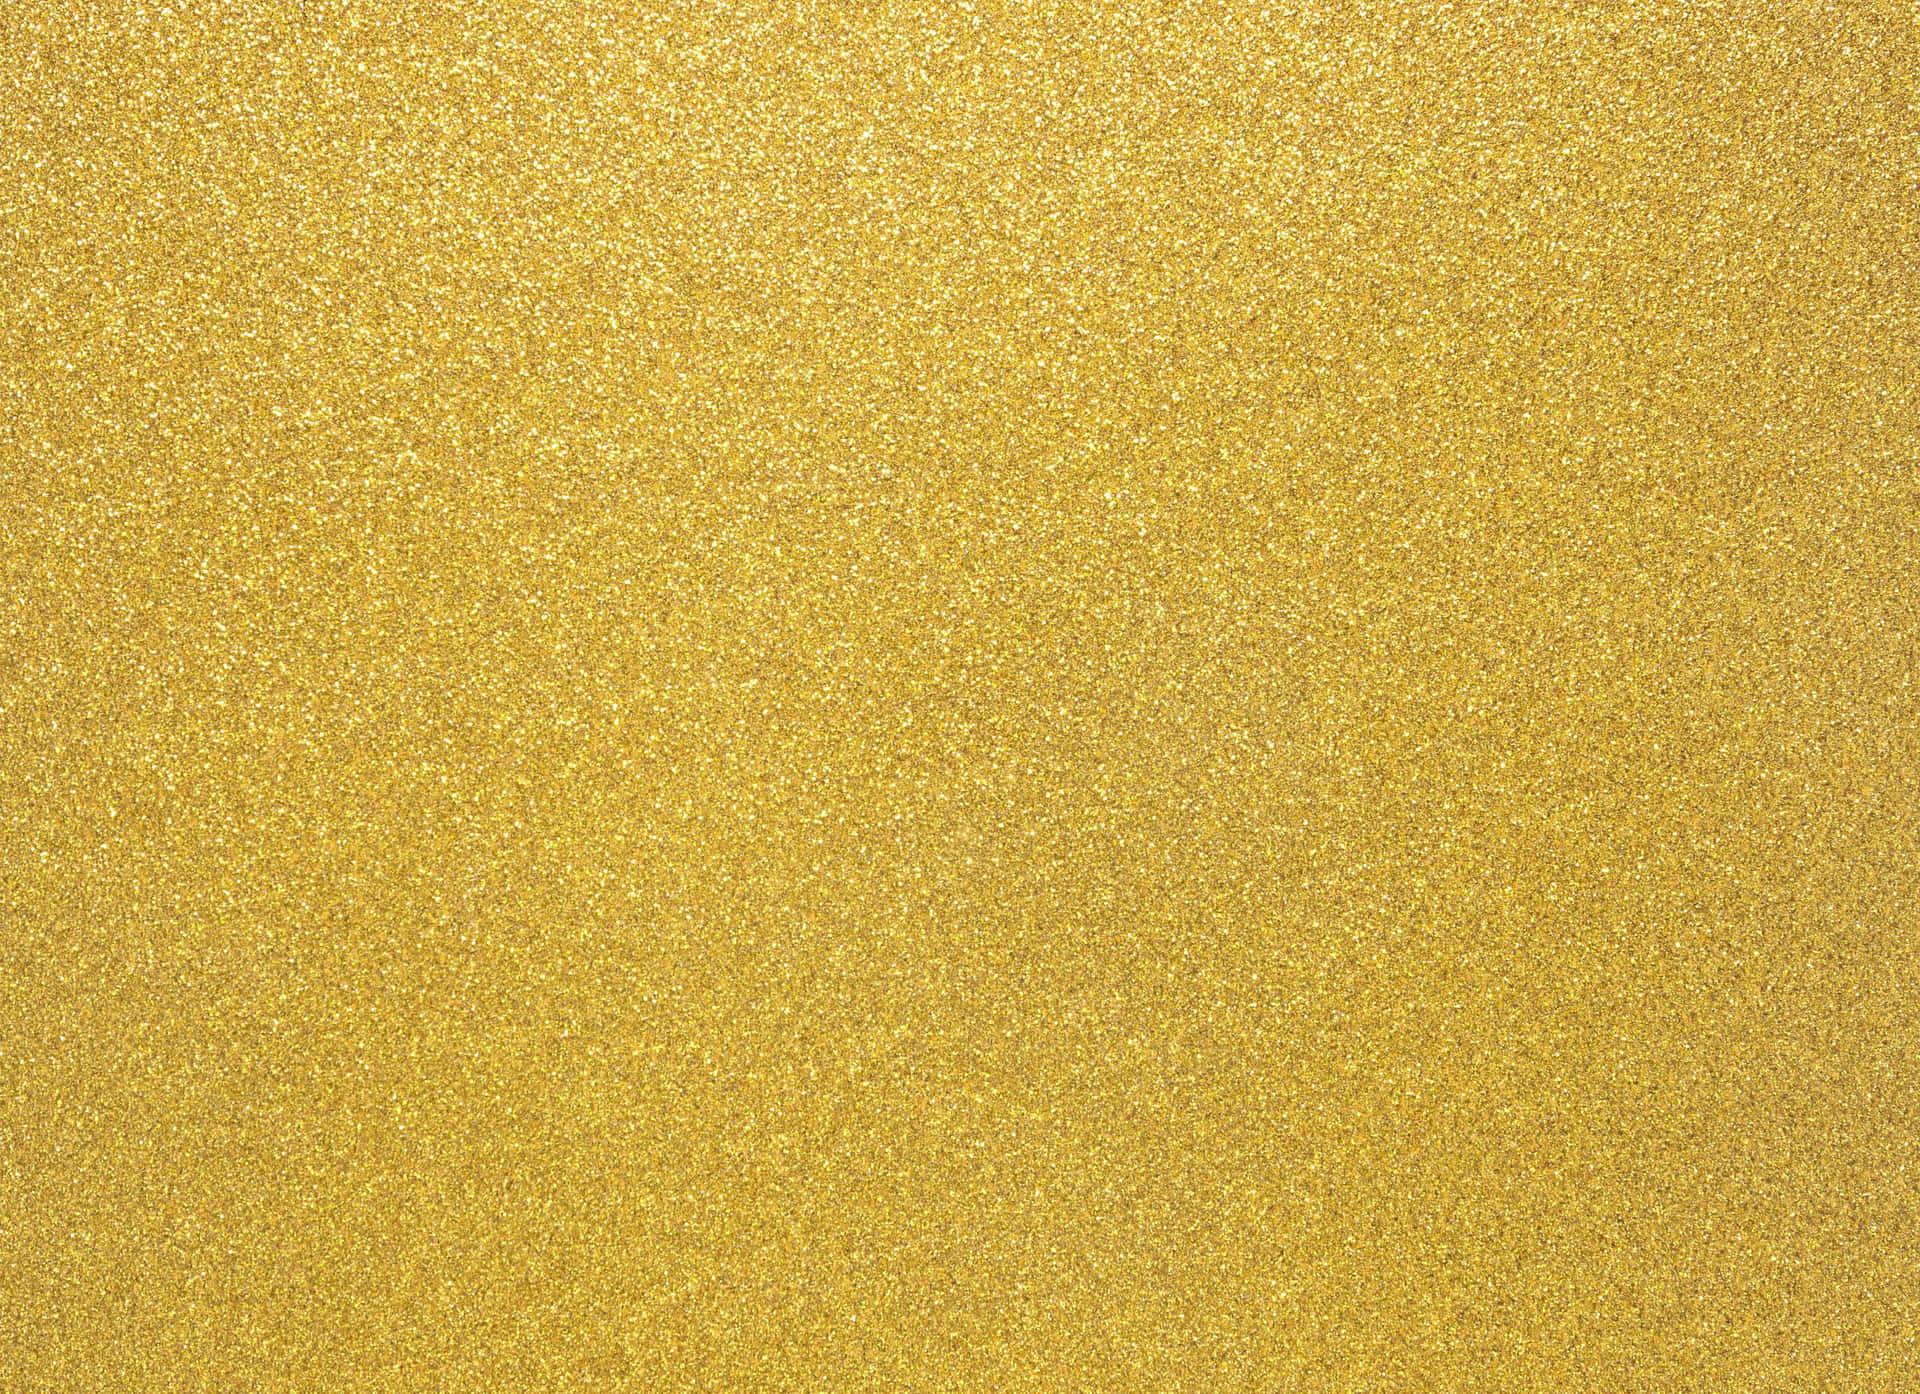 Shine Brightly with a High Resolution Gold Glitter Background.